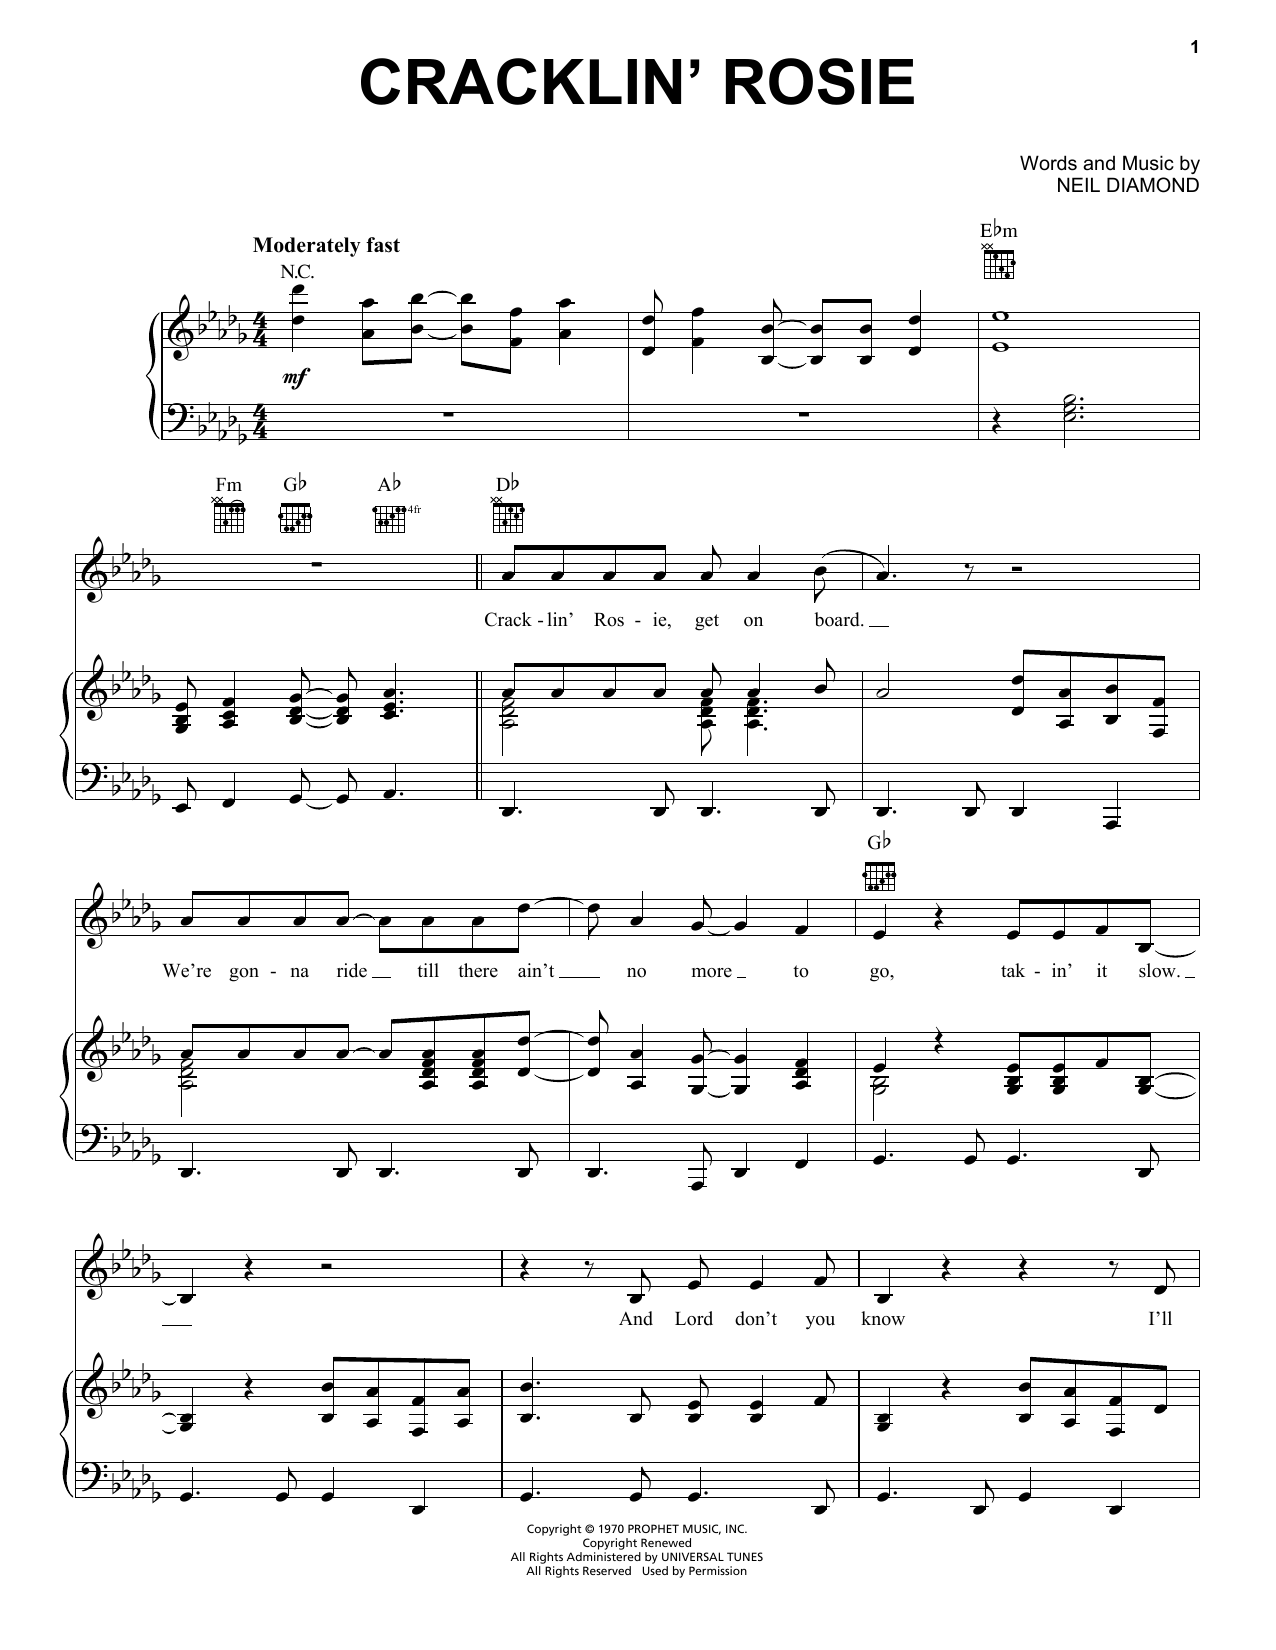 Neil Diamond Cracklin' Rosie sheet music notes and chords. Download Printable PDF.